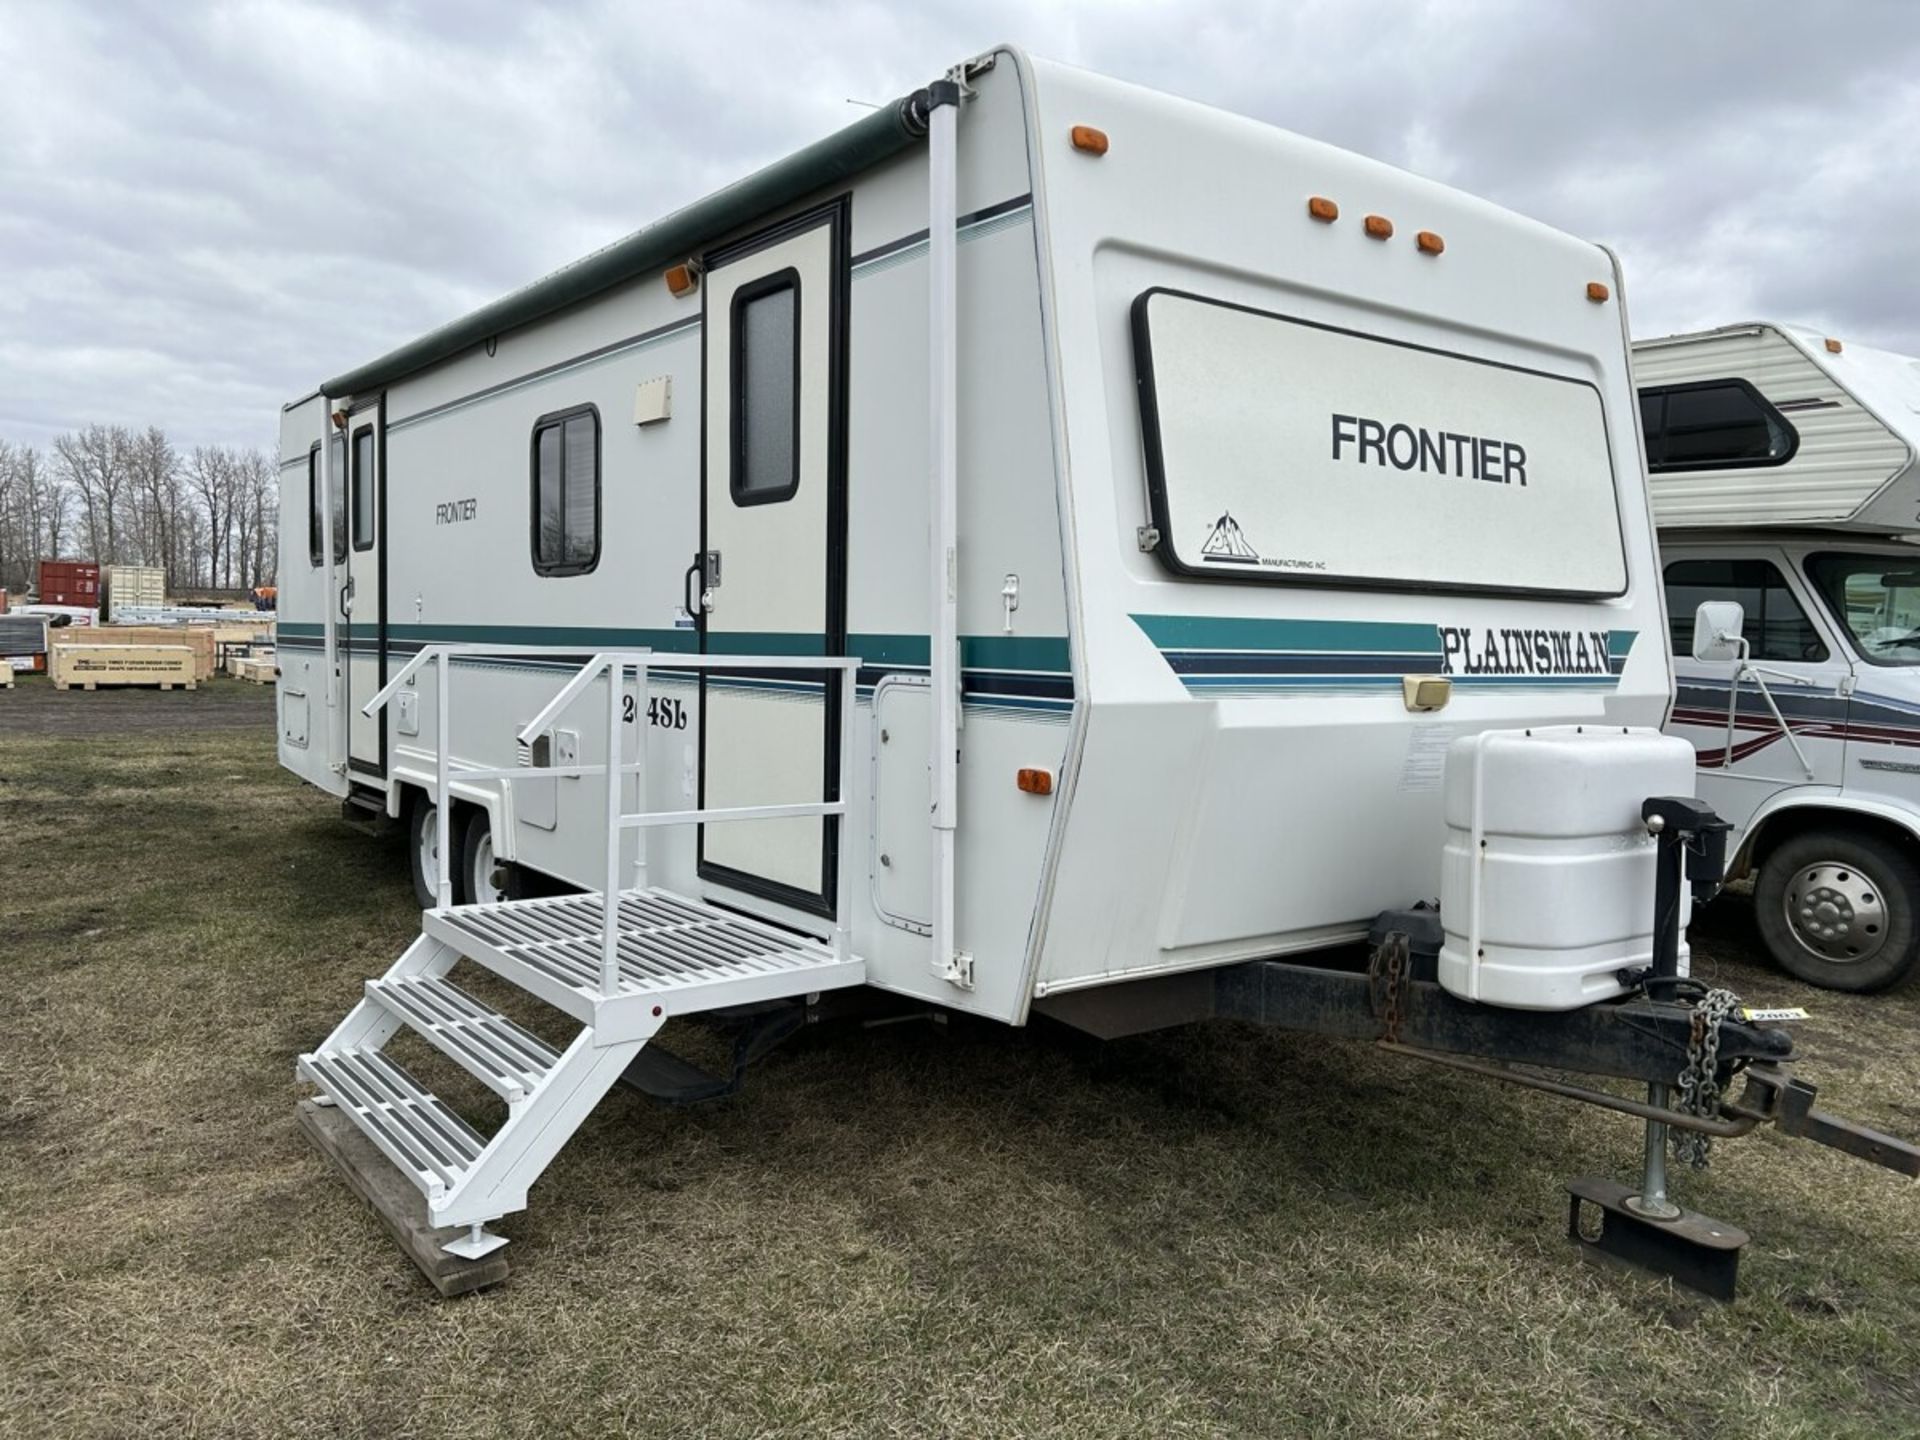 1999 FRONTIER PLAINSMAN T264SL 25 FT HOLIDAY TRAILER, SLIDE OUT, NOTE: CUSTOM STEP SOLD SEPERATELY